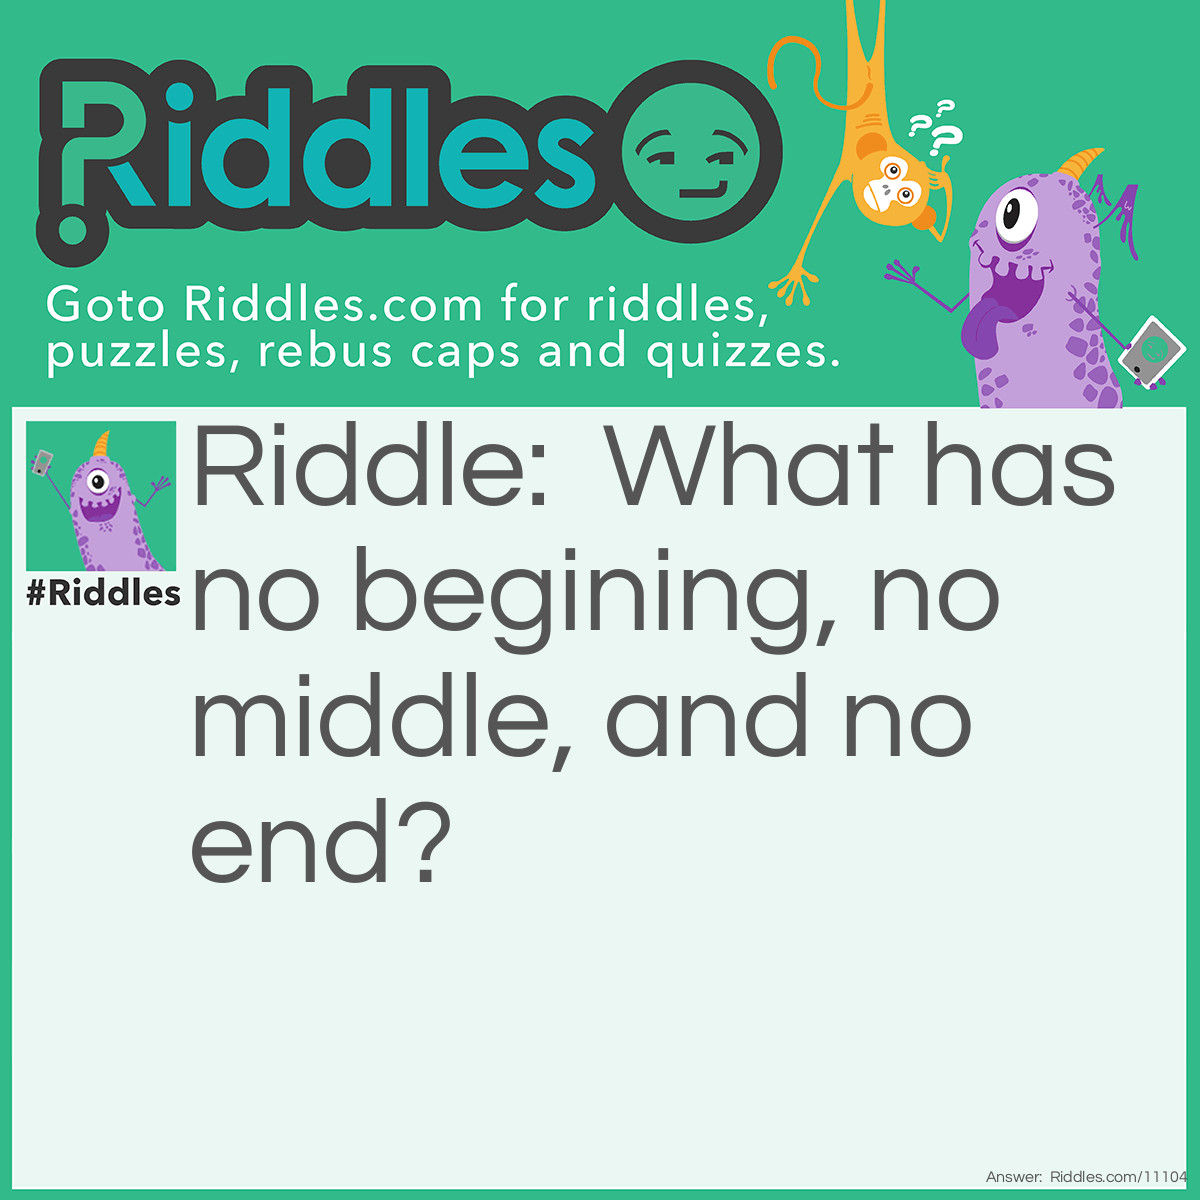 Riddle: What has no begining, no middle, and no end? Answer: Circle.